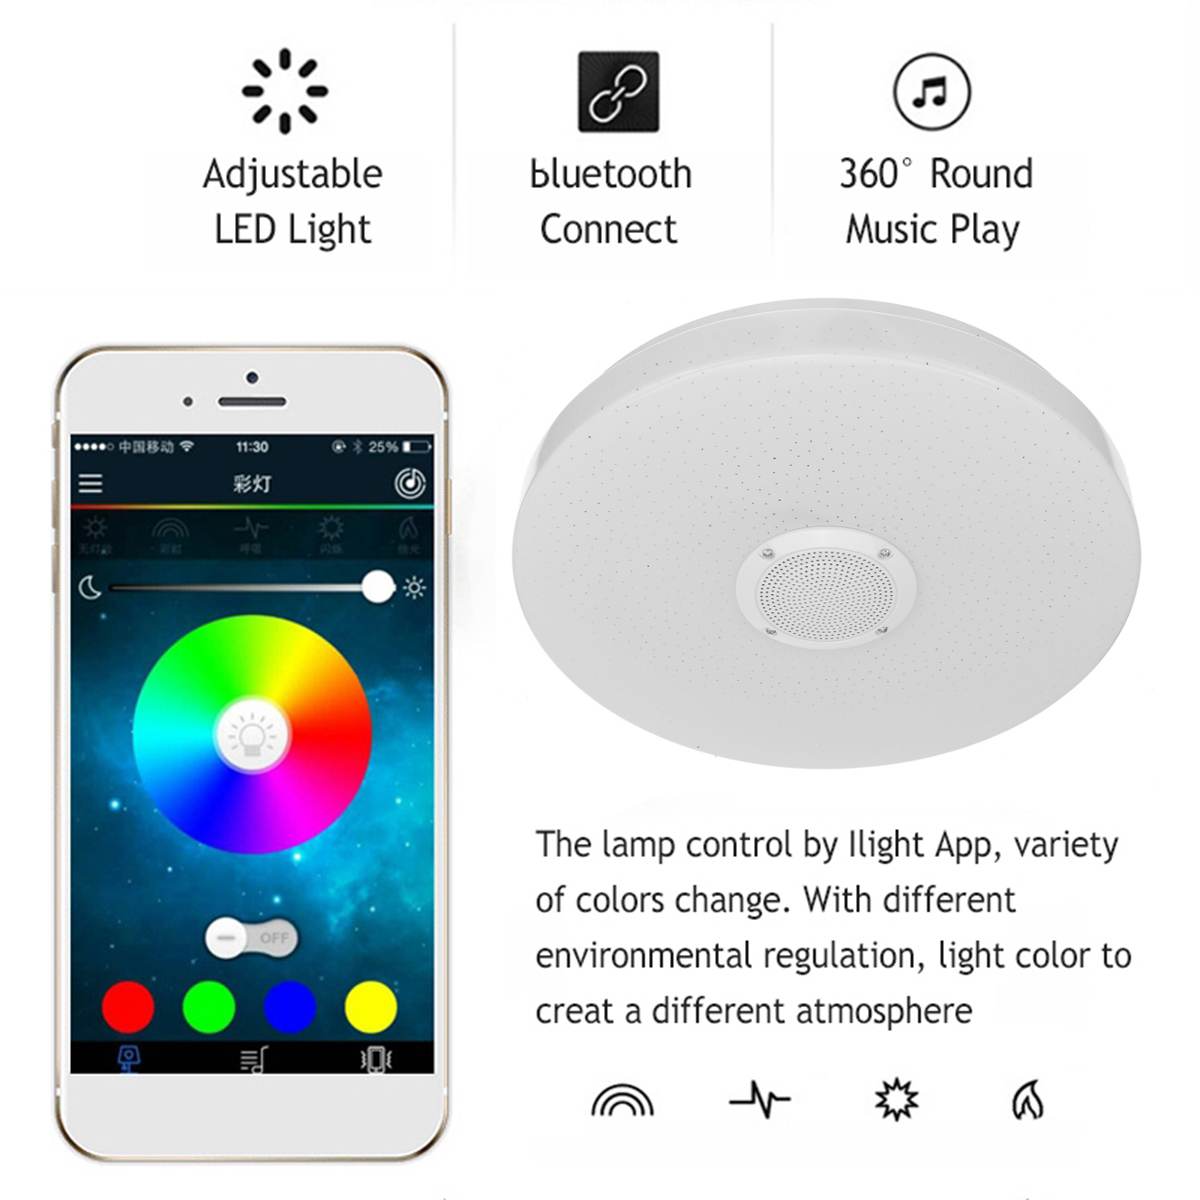 Modern RGB LED Ceiling Light 36W 52W Ceiling lamp APP bluetooth Music Lamp Living Room Bedroom Ceiling Lighting + Remote control